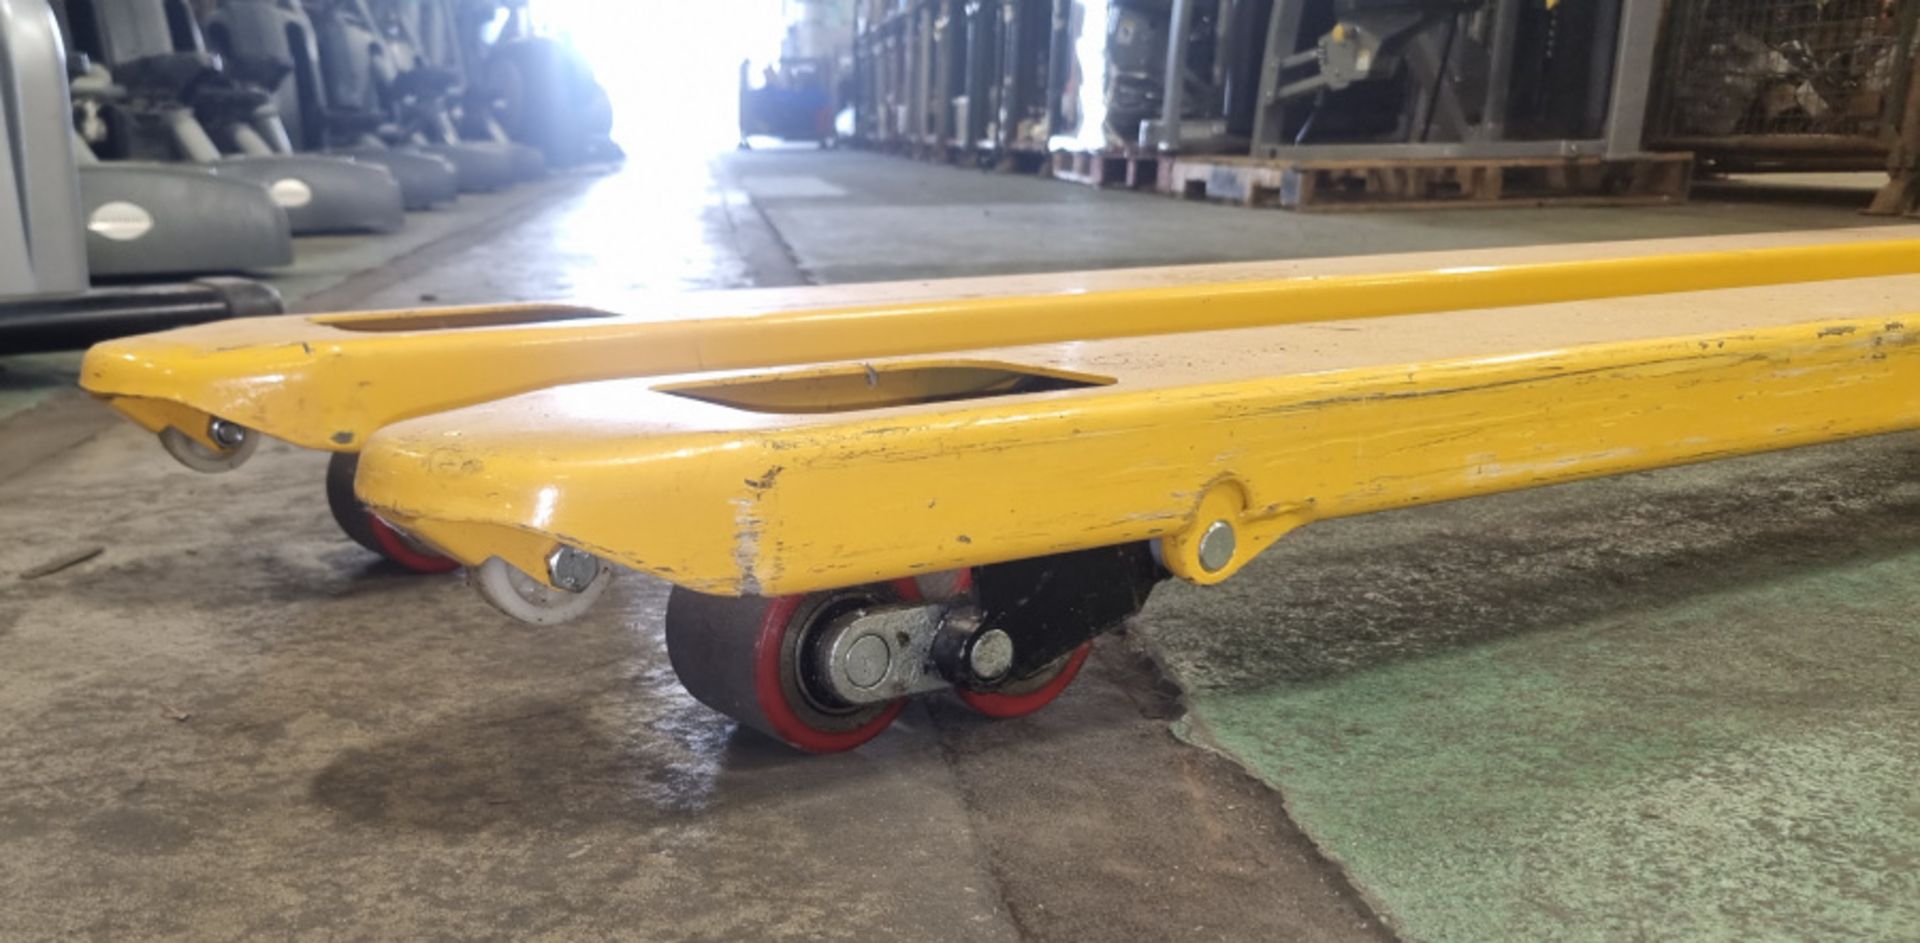 Extra long tine pallet truck - L 54 x W 236 x H 124 cm - Image 5 of 5